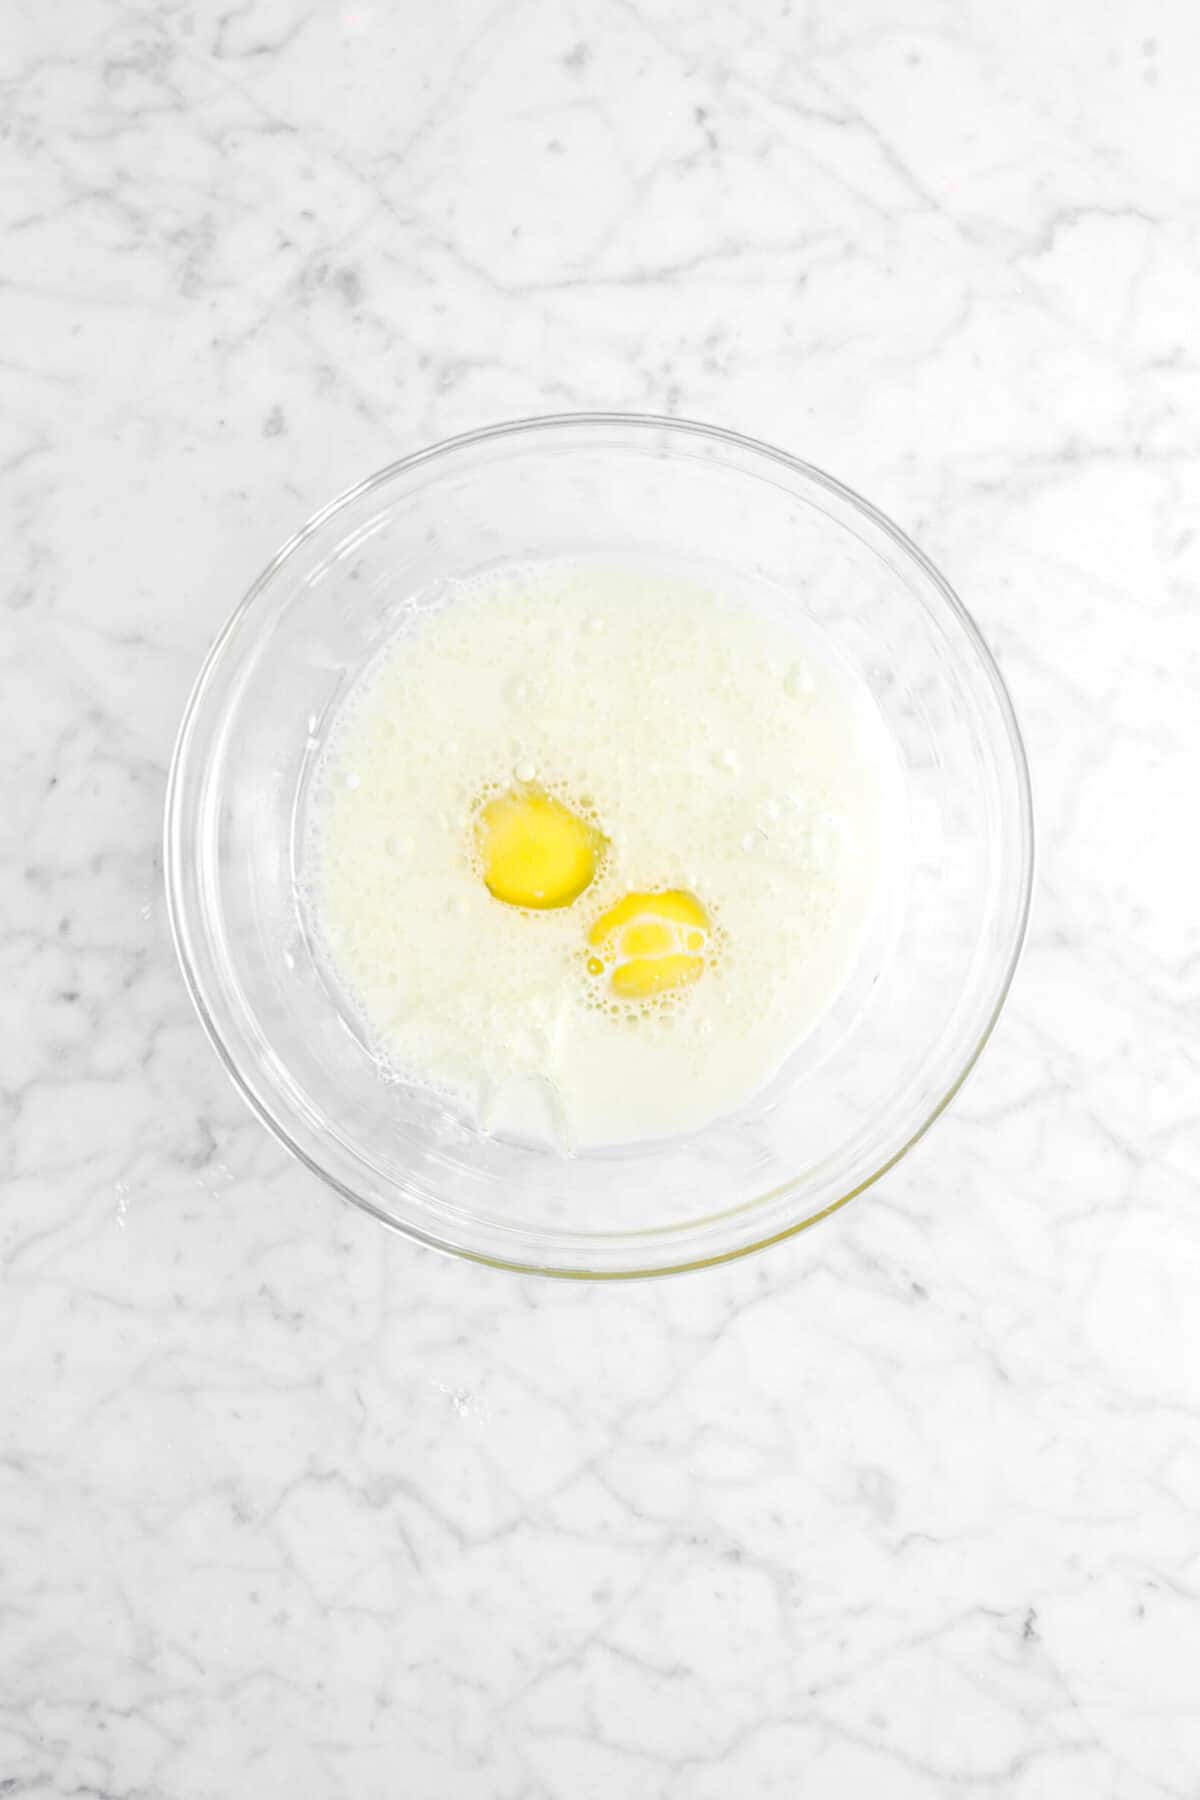 oil, eggs, and milk in glass bowl